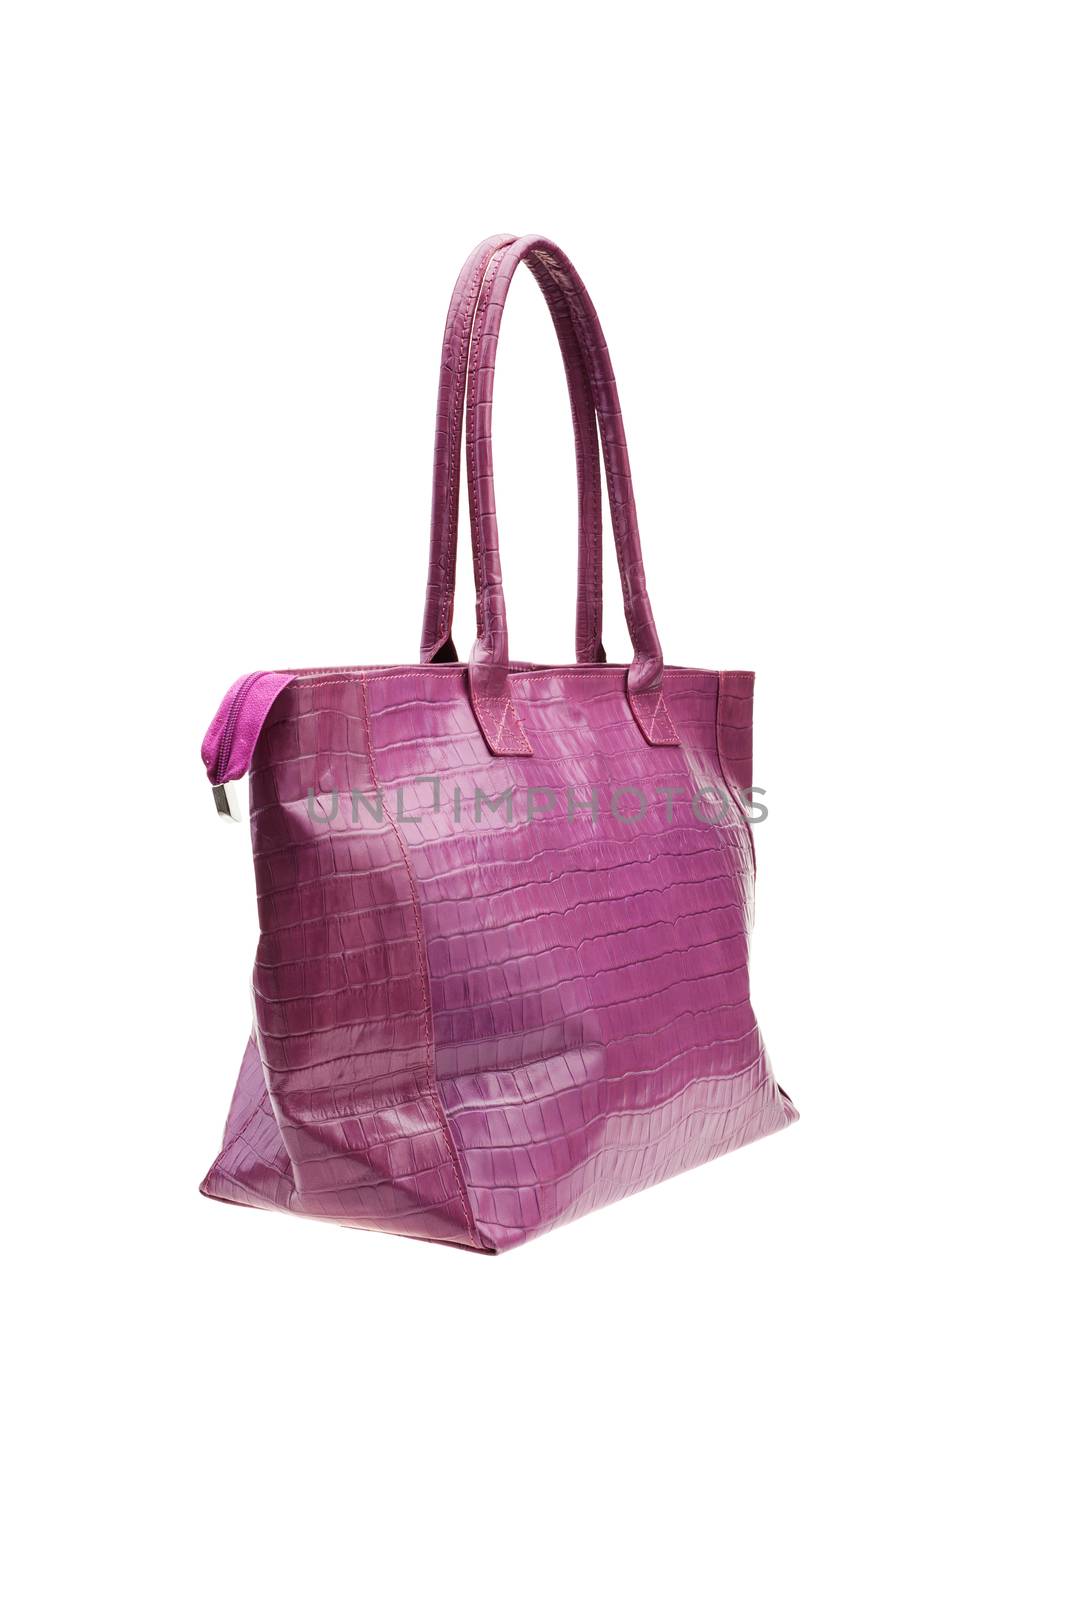 New violet womens bag isolated on white background.